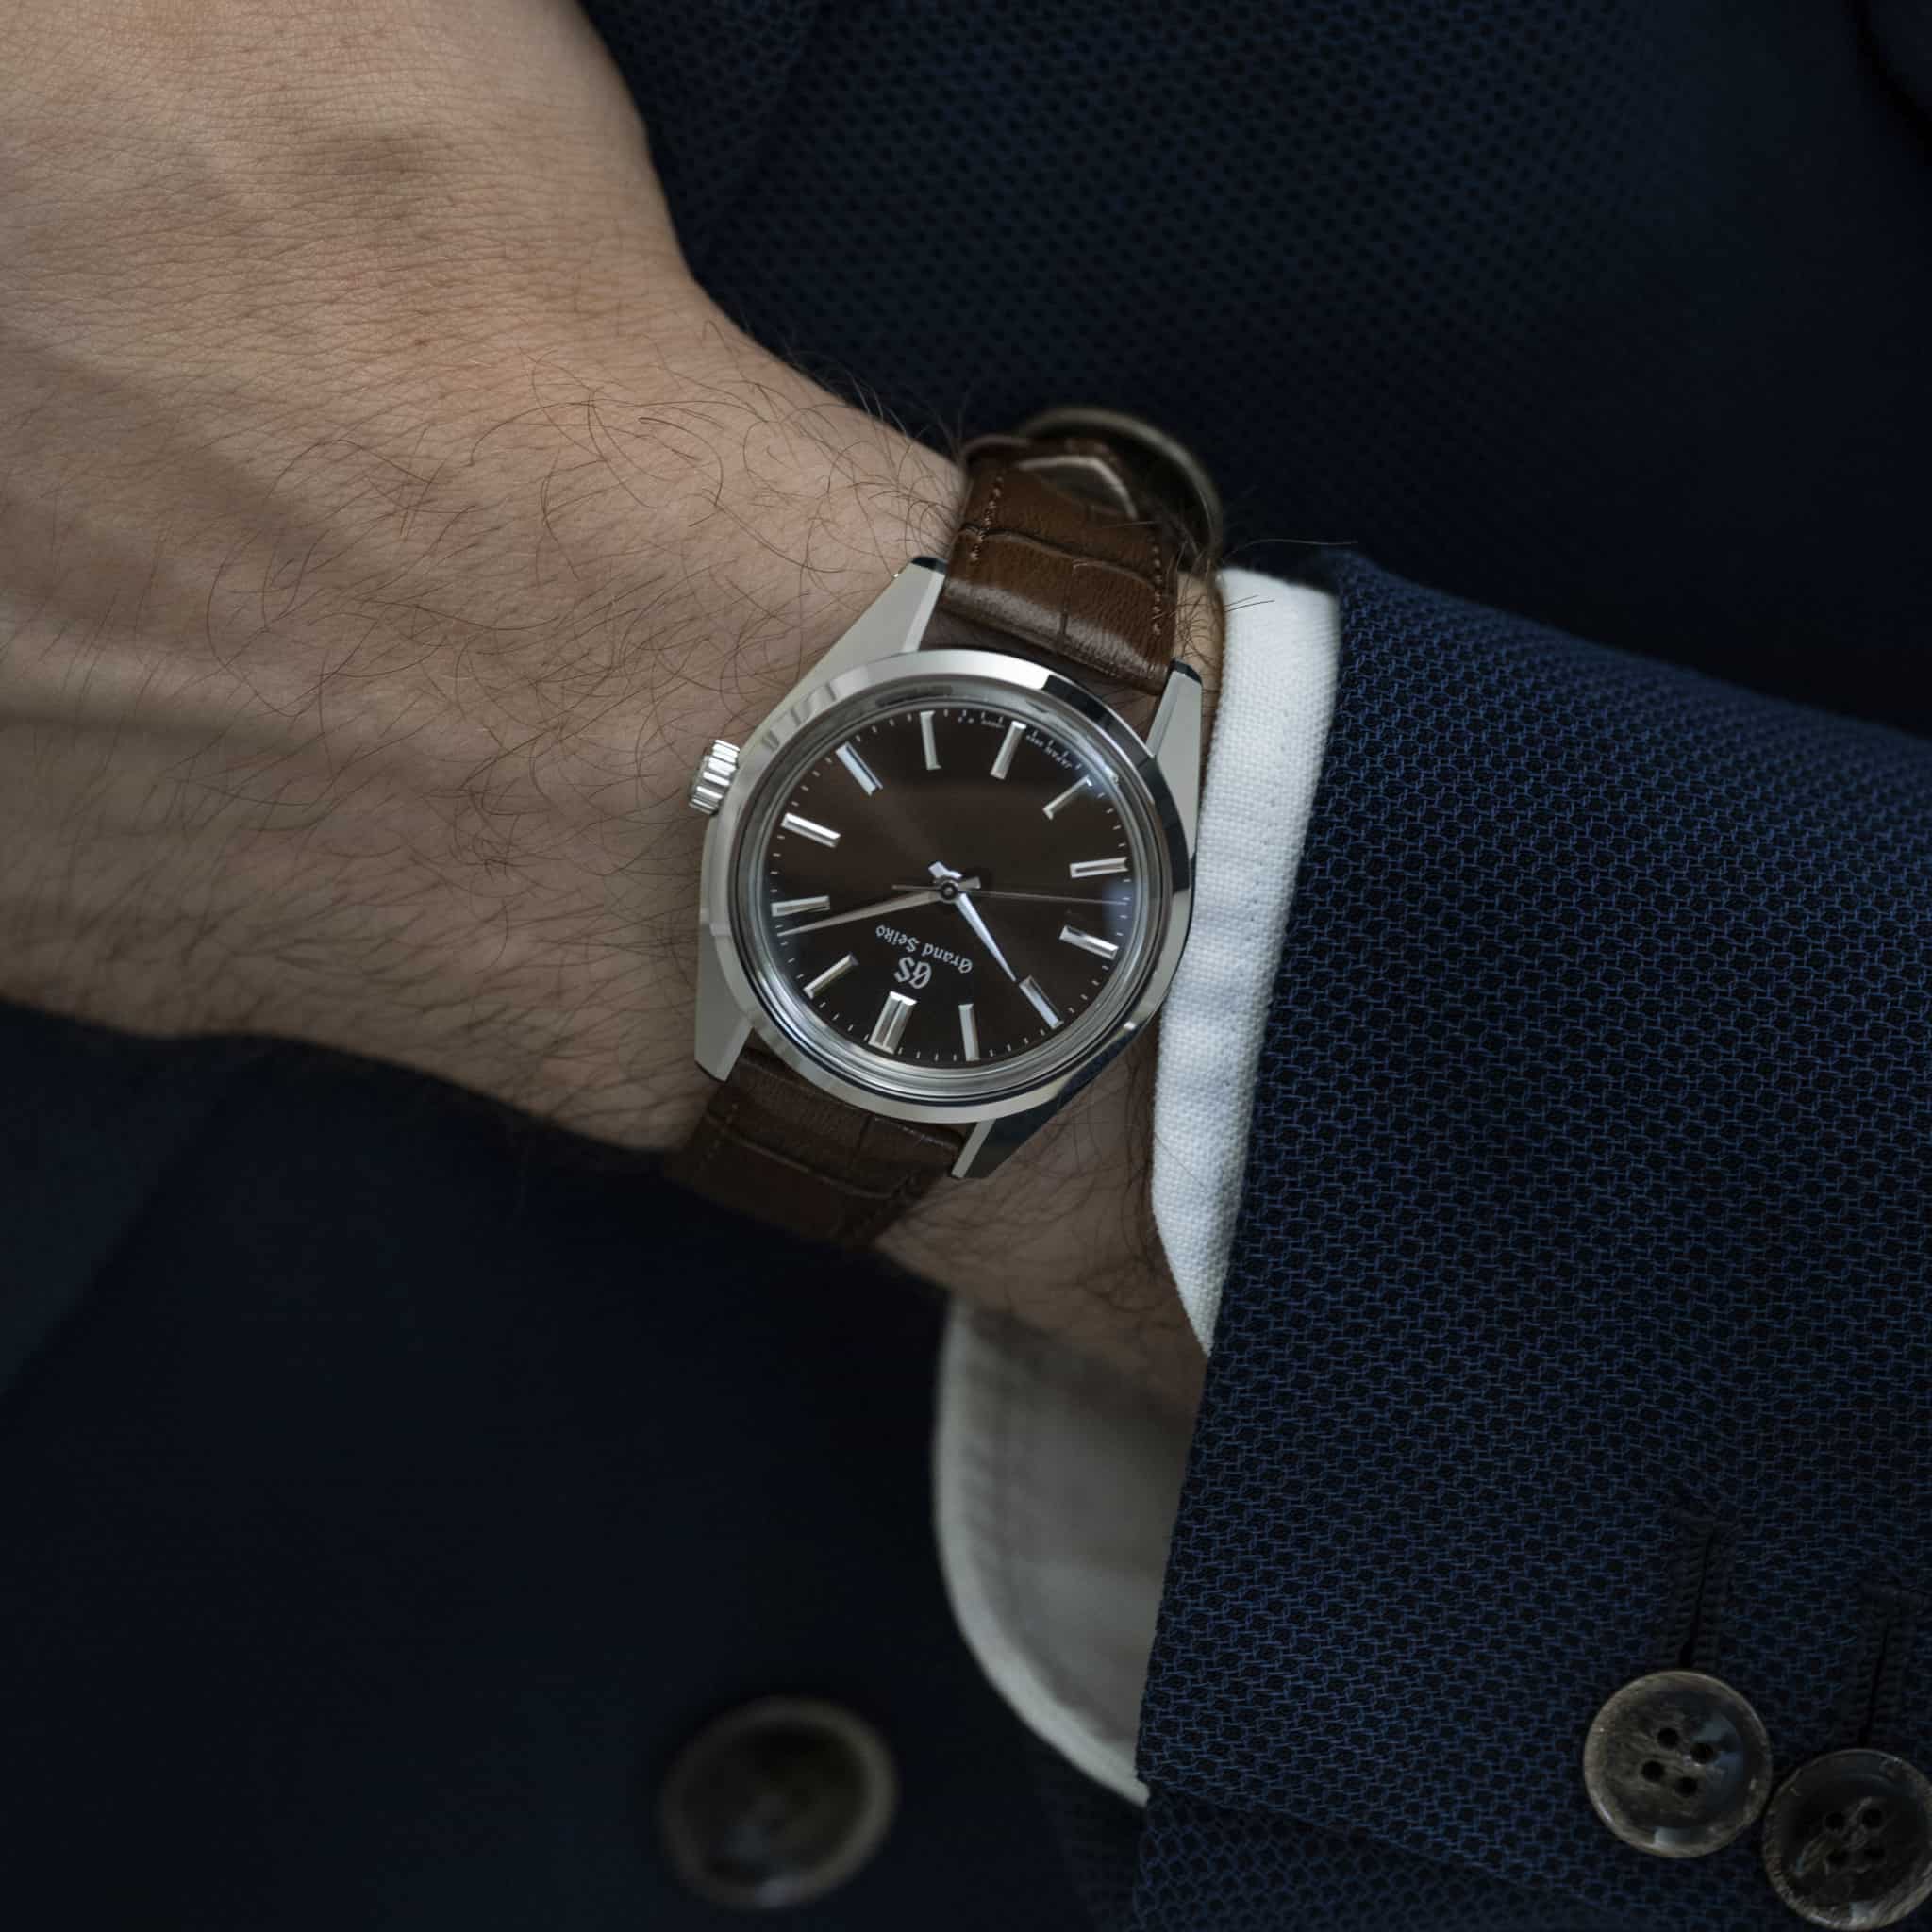 Grand Seiko Adds Two Hand-Wound Timepieces to Heritage Collection |  WatchTime - USA's  Watch Magazine